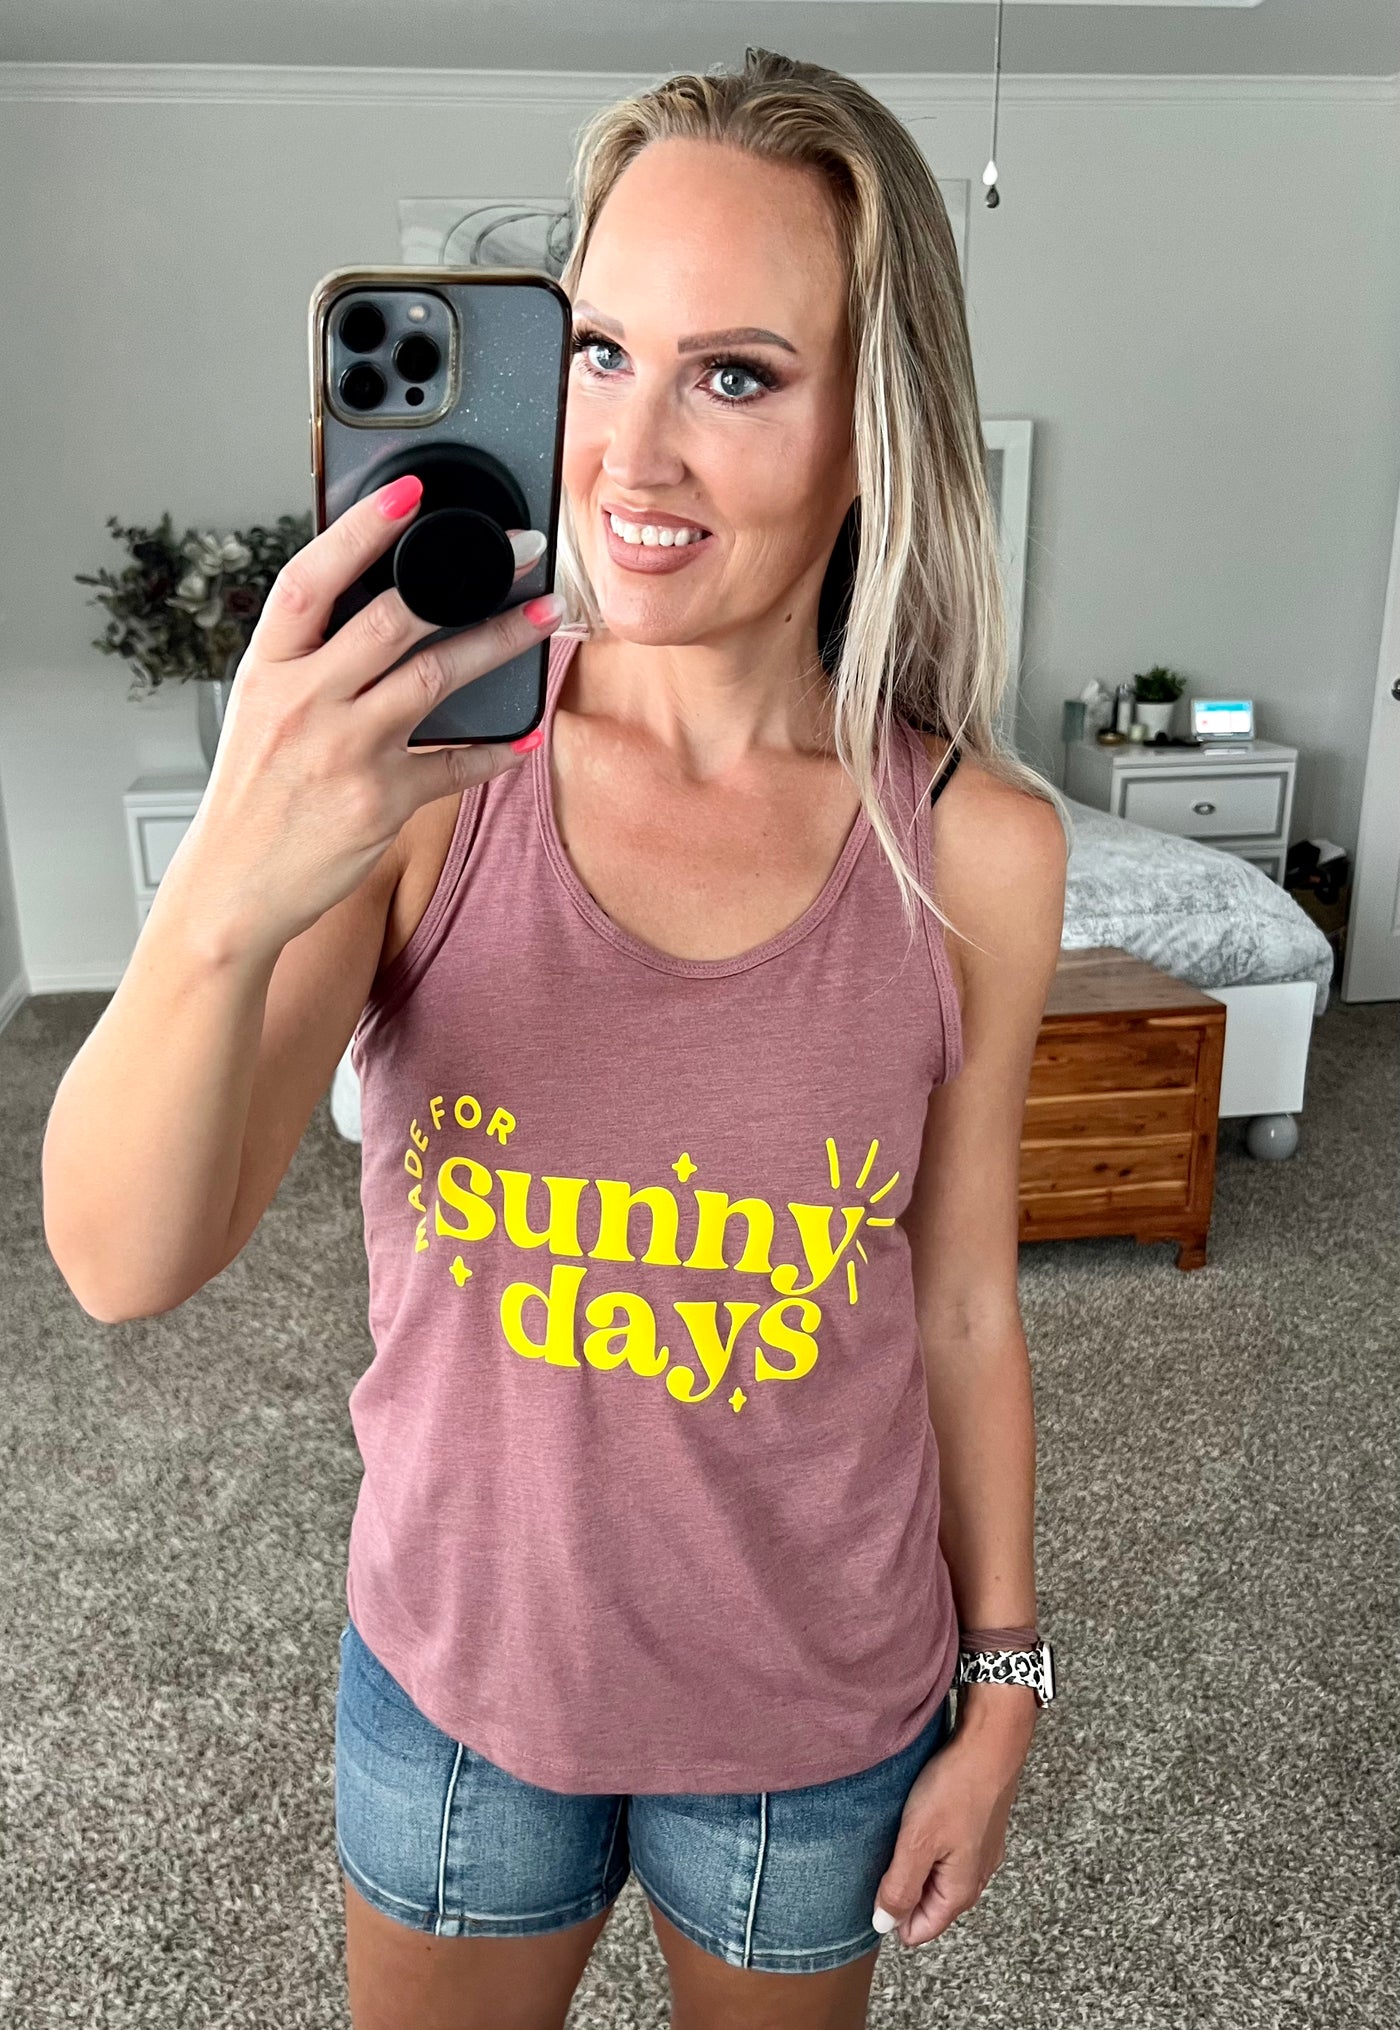 Made for Sunny Days graphic top